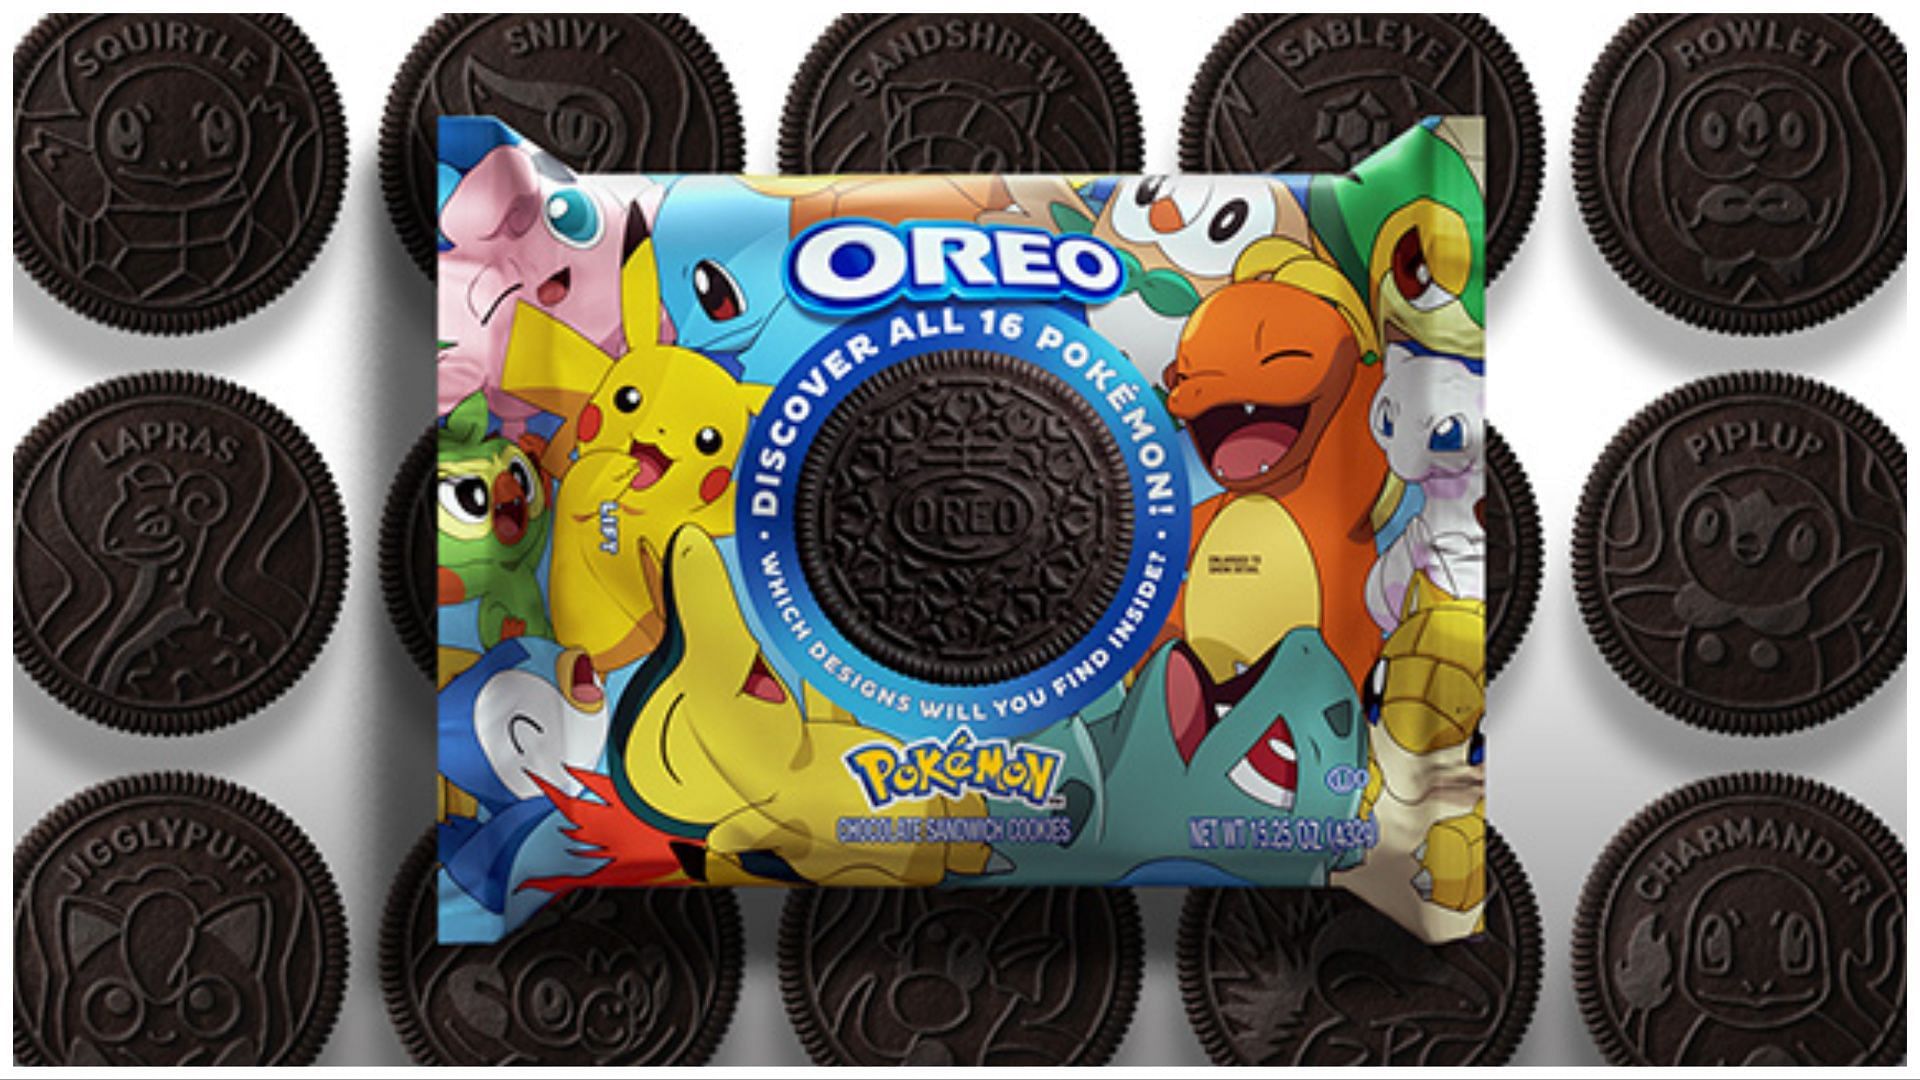 Super Mario characters adorn new Oreos, available for limited time